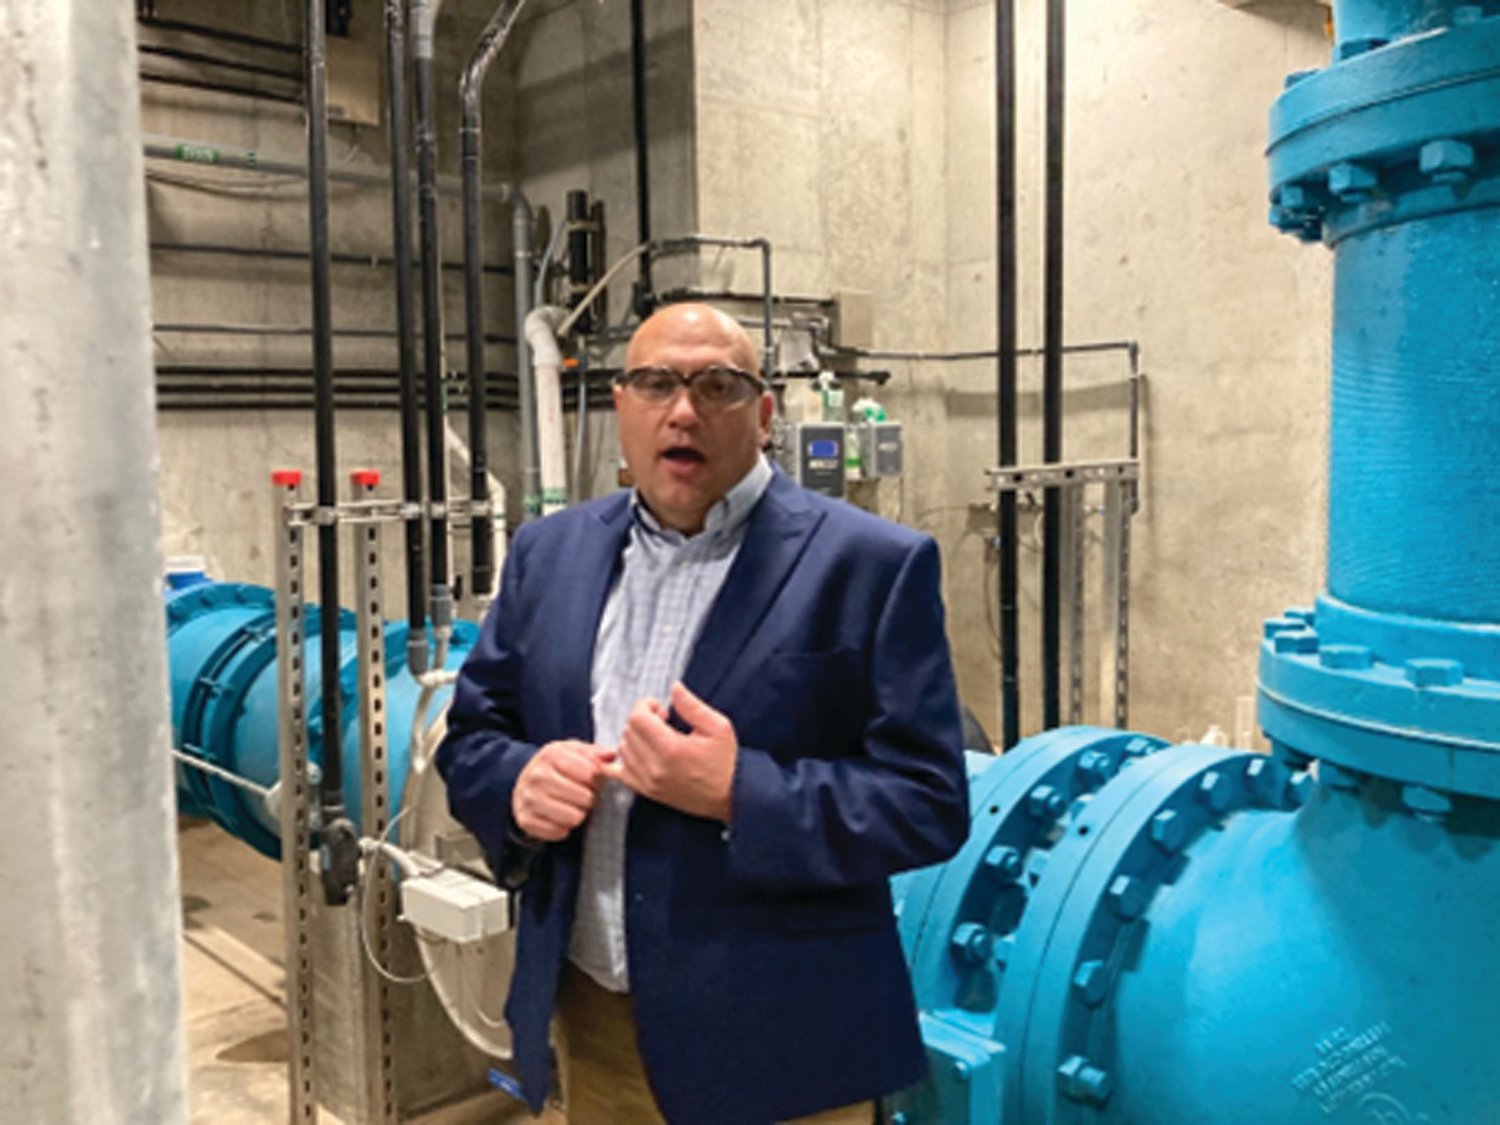 Pennsylvania American Water official Jim Gable shows off a new ultraviolet light disinfection system that is part of $24 million in upgrades at the company’s Lower Makefield Township treatment plant.